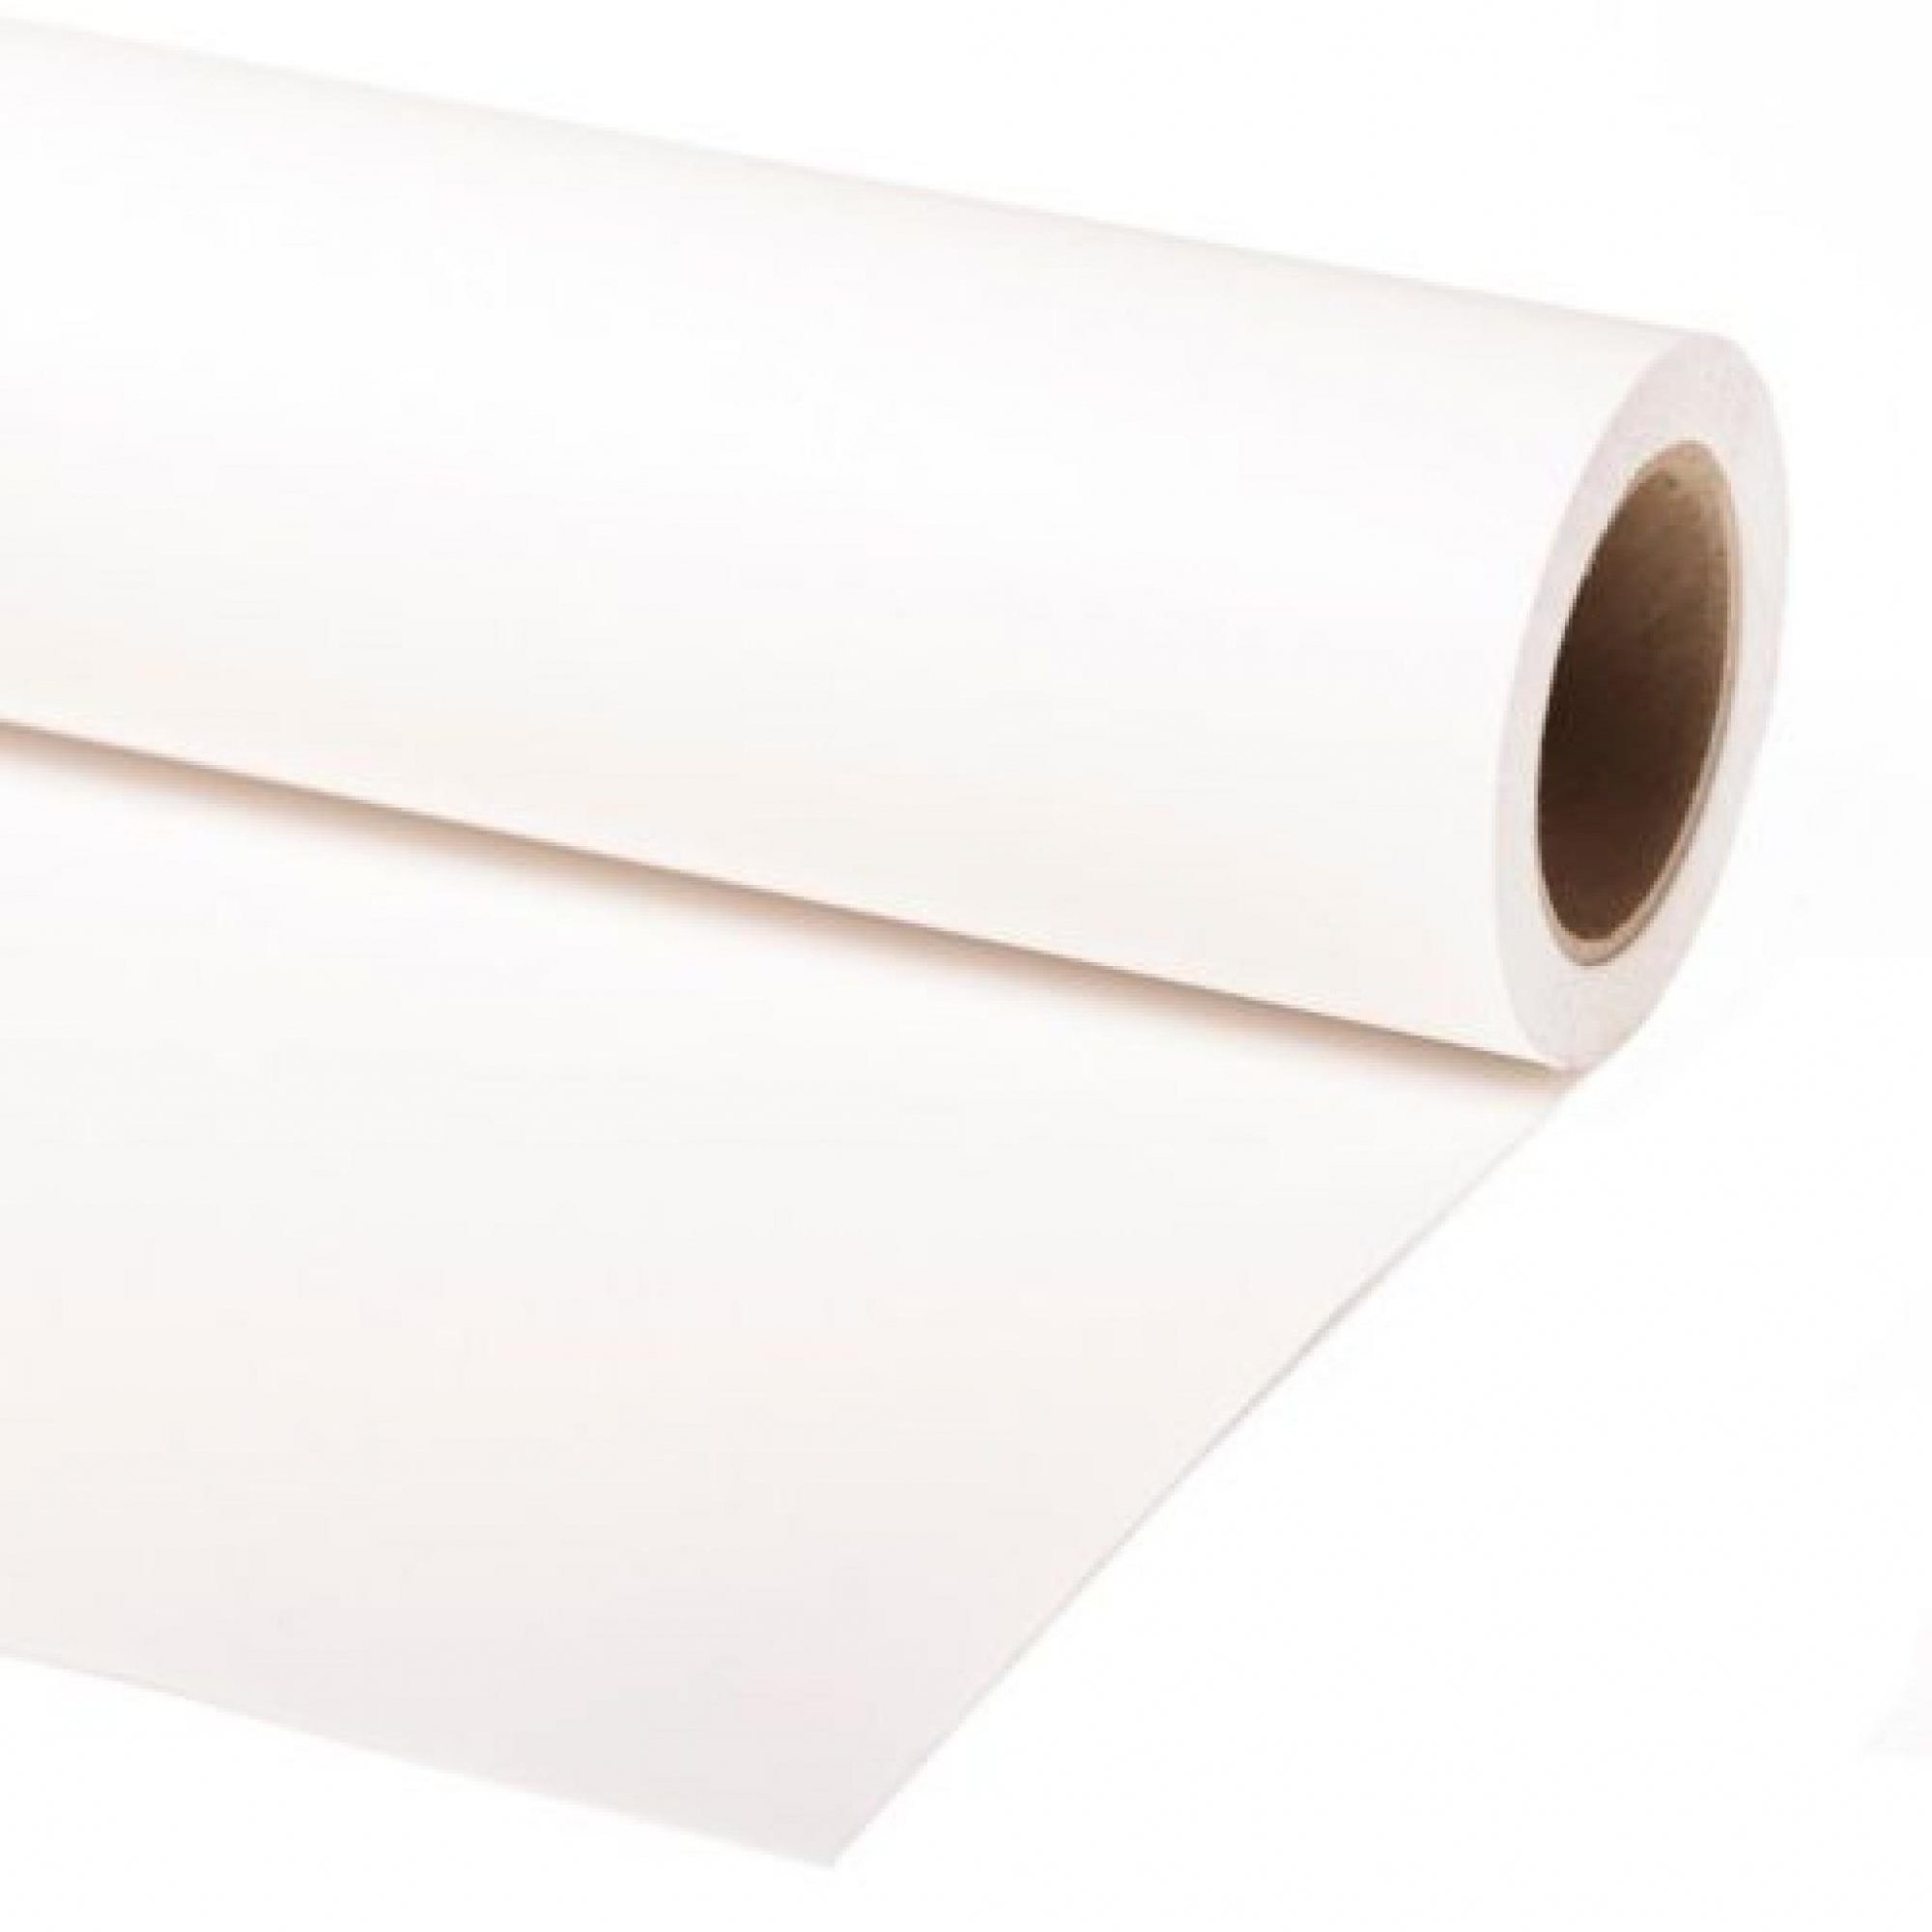 Lastolite Paper Roll, White,  x 11m - 9050 - Backgrounds - Firstcall  Photographic Ltd